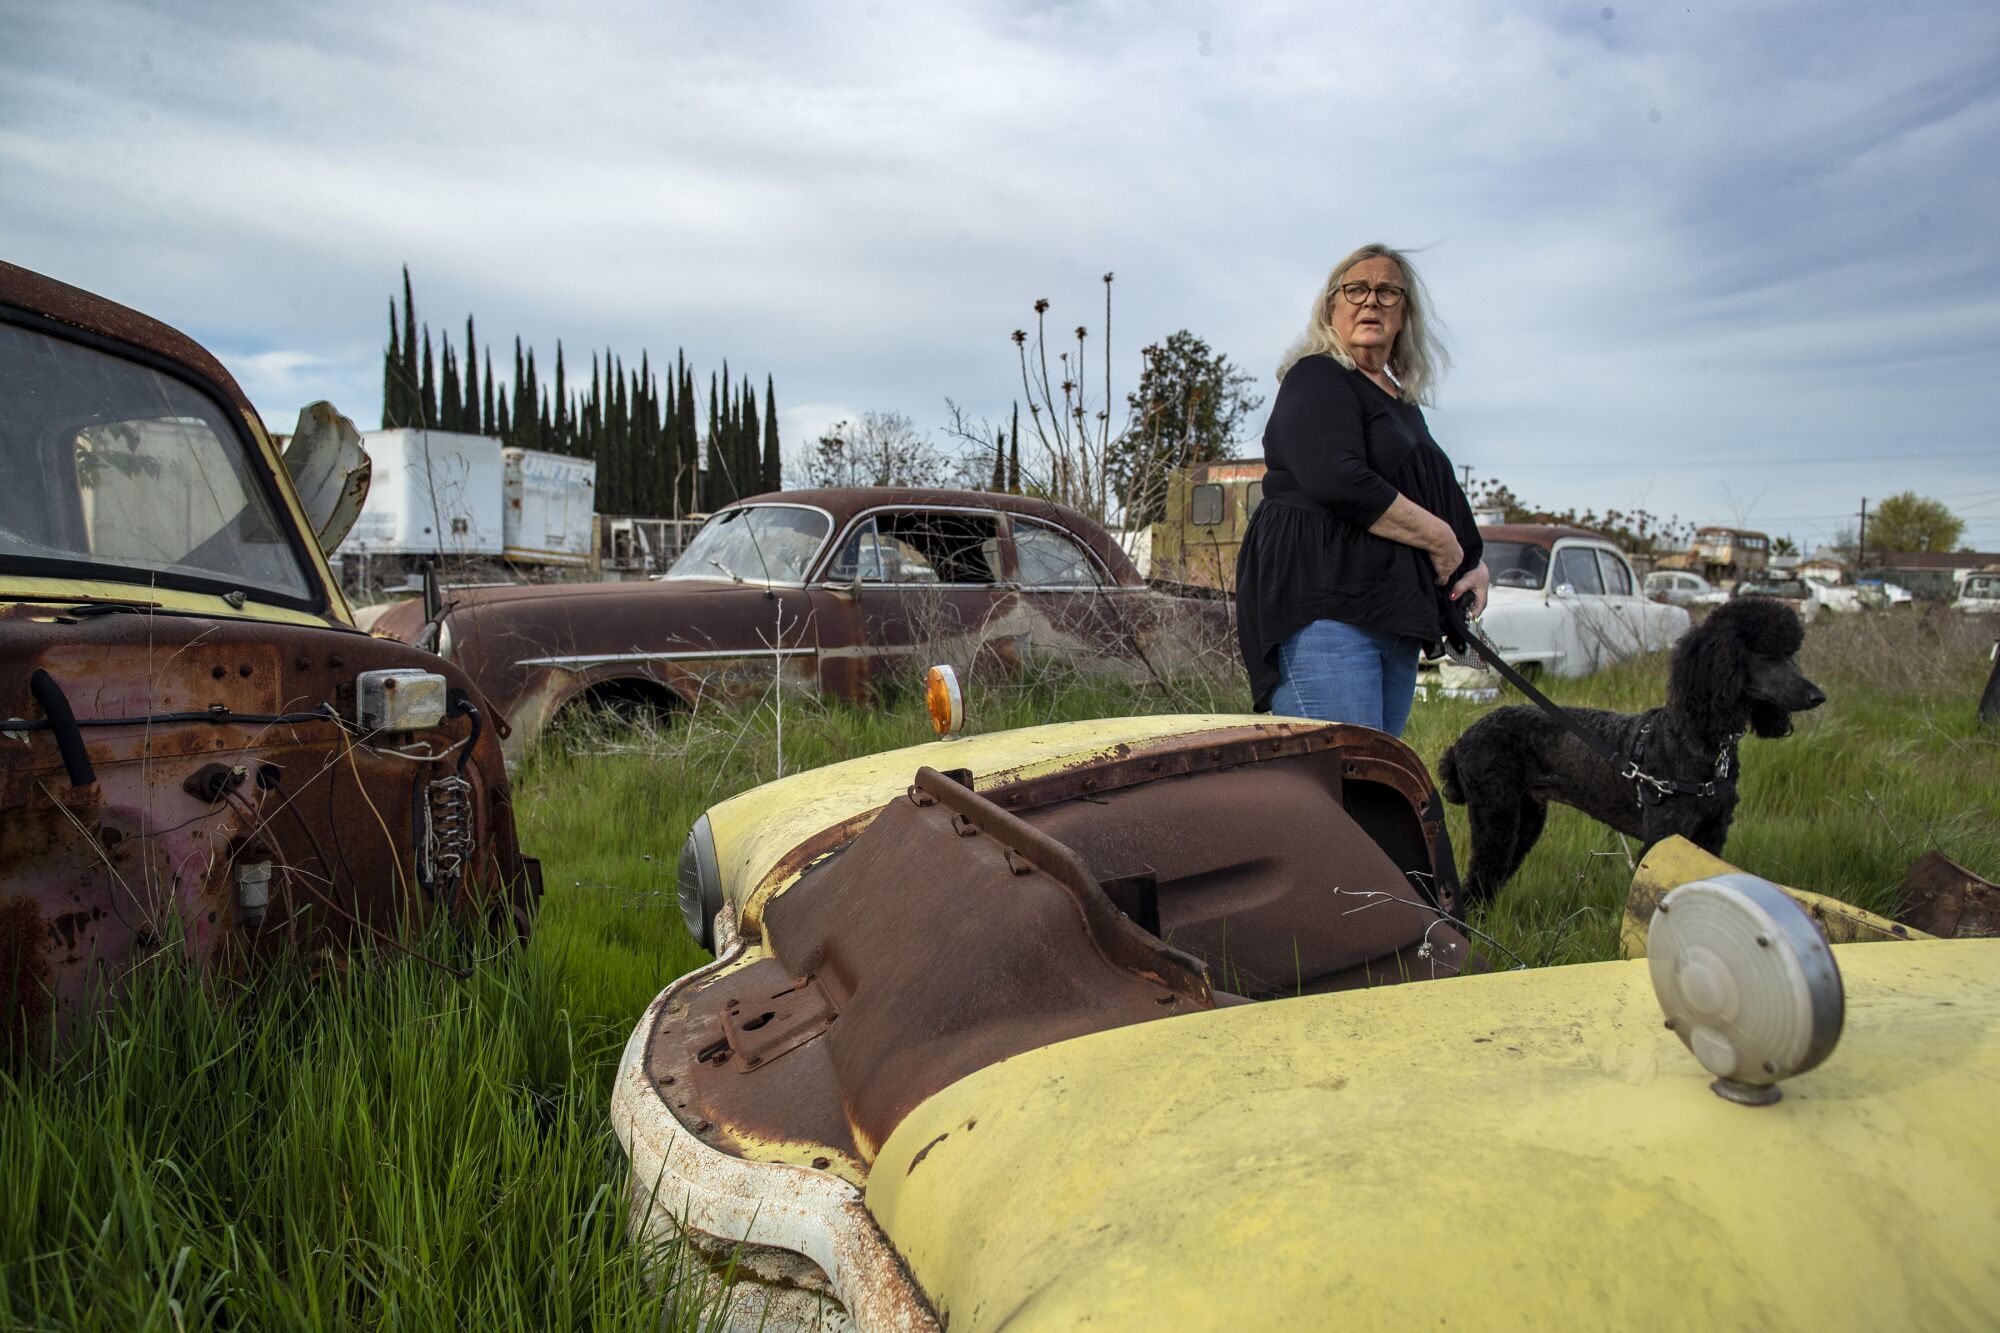 Georgia DeFilippo with her dog stands in a lot strewn with old cars, junk and antiques.